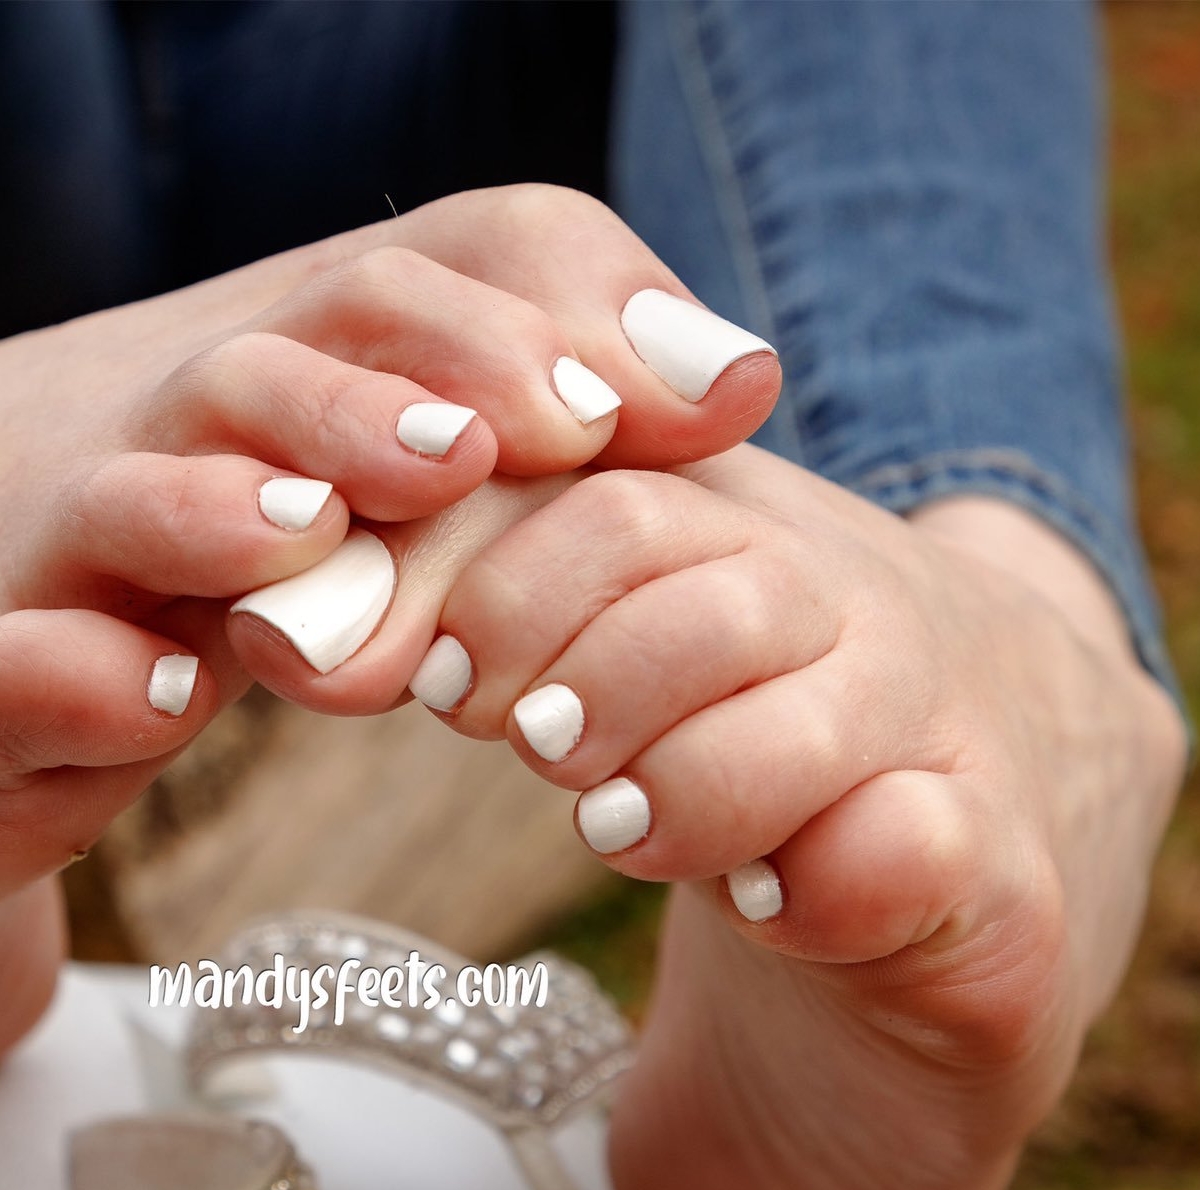 a woman named Mandy showing her toes